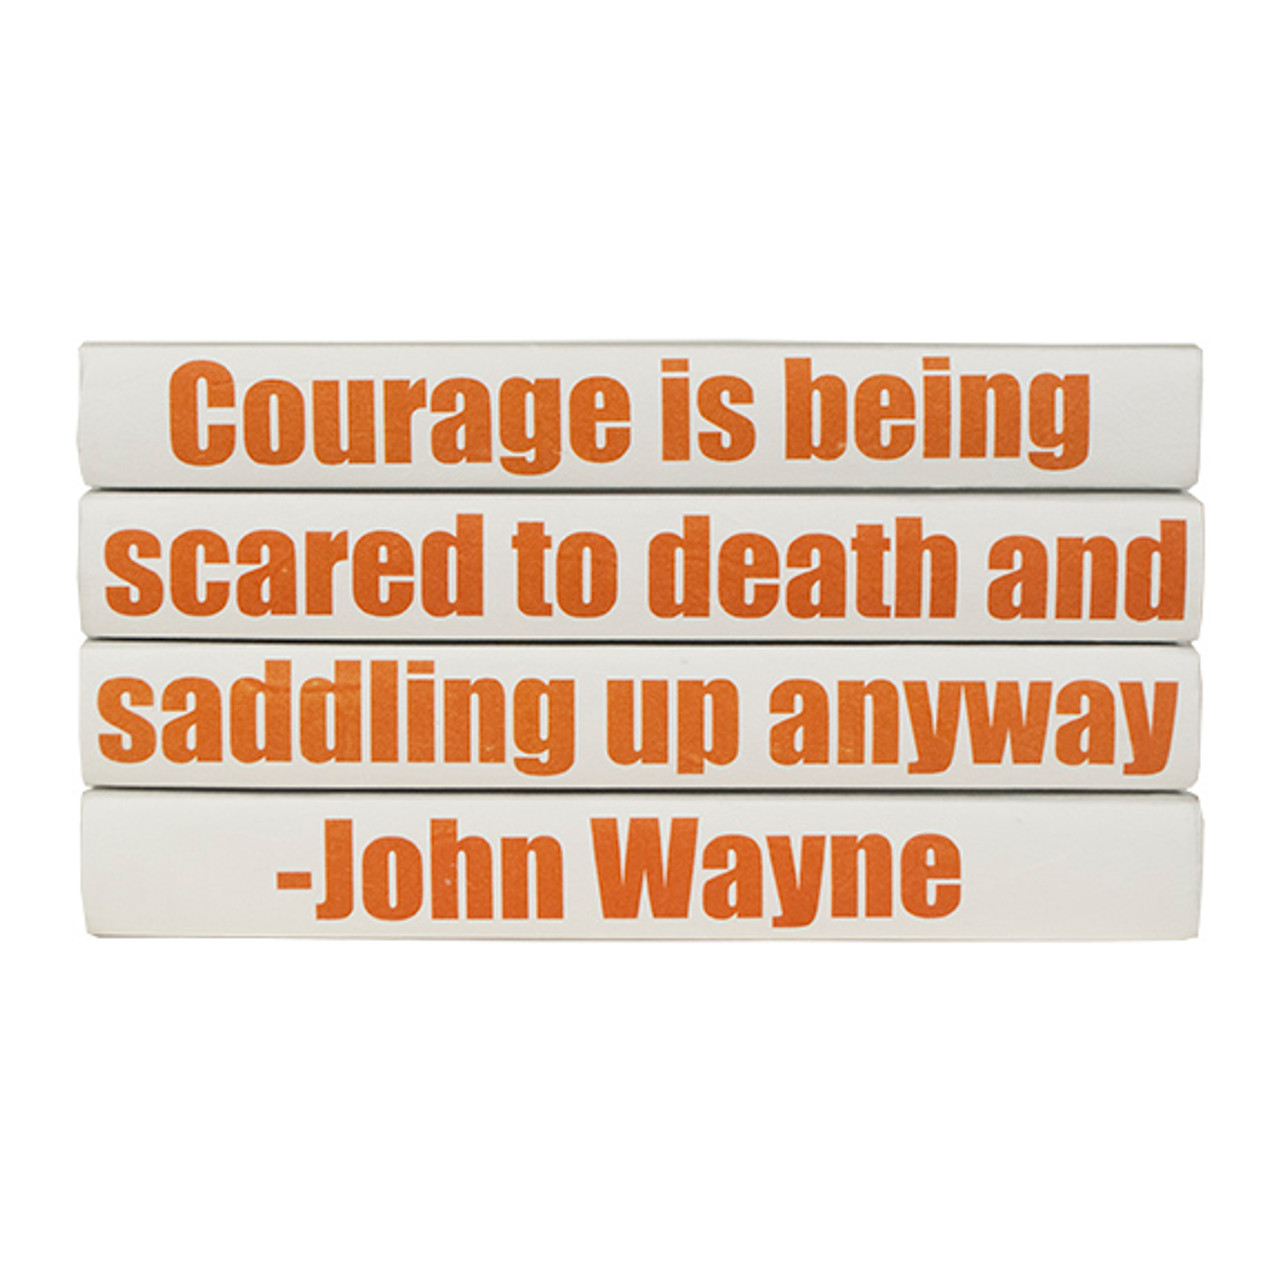 4 Vol- Courage is being.- John Wayne Quote / Off- White Covers / 9.5  wide / Approx. 5 tall - E Lawrence, LTD.